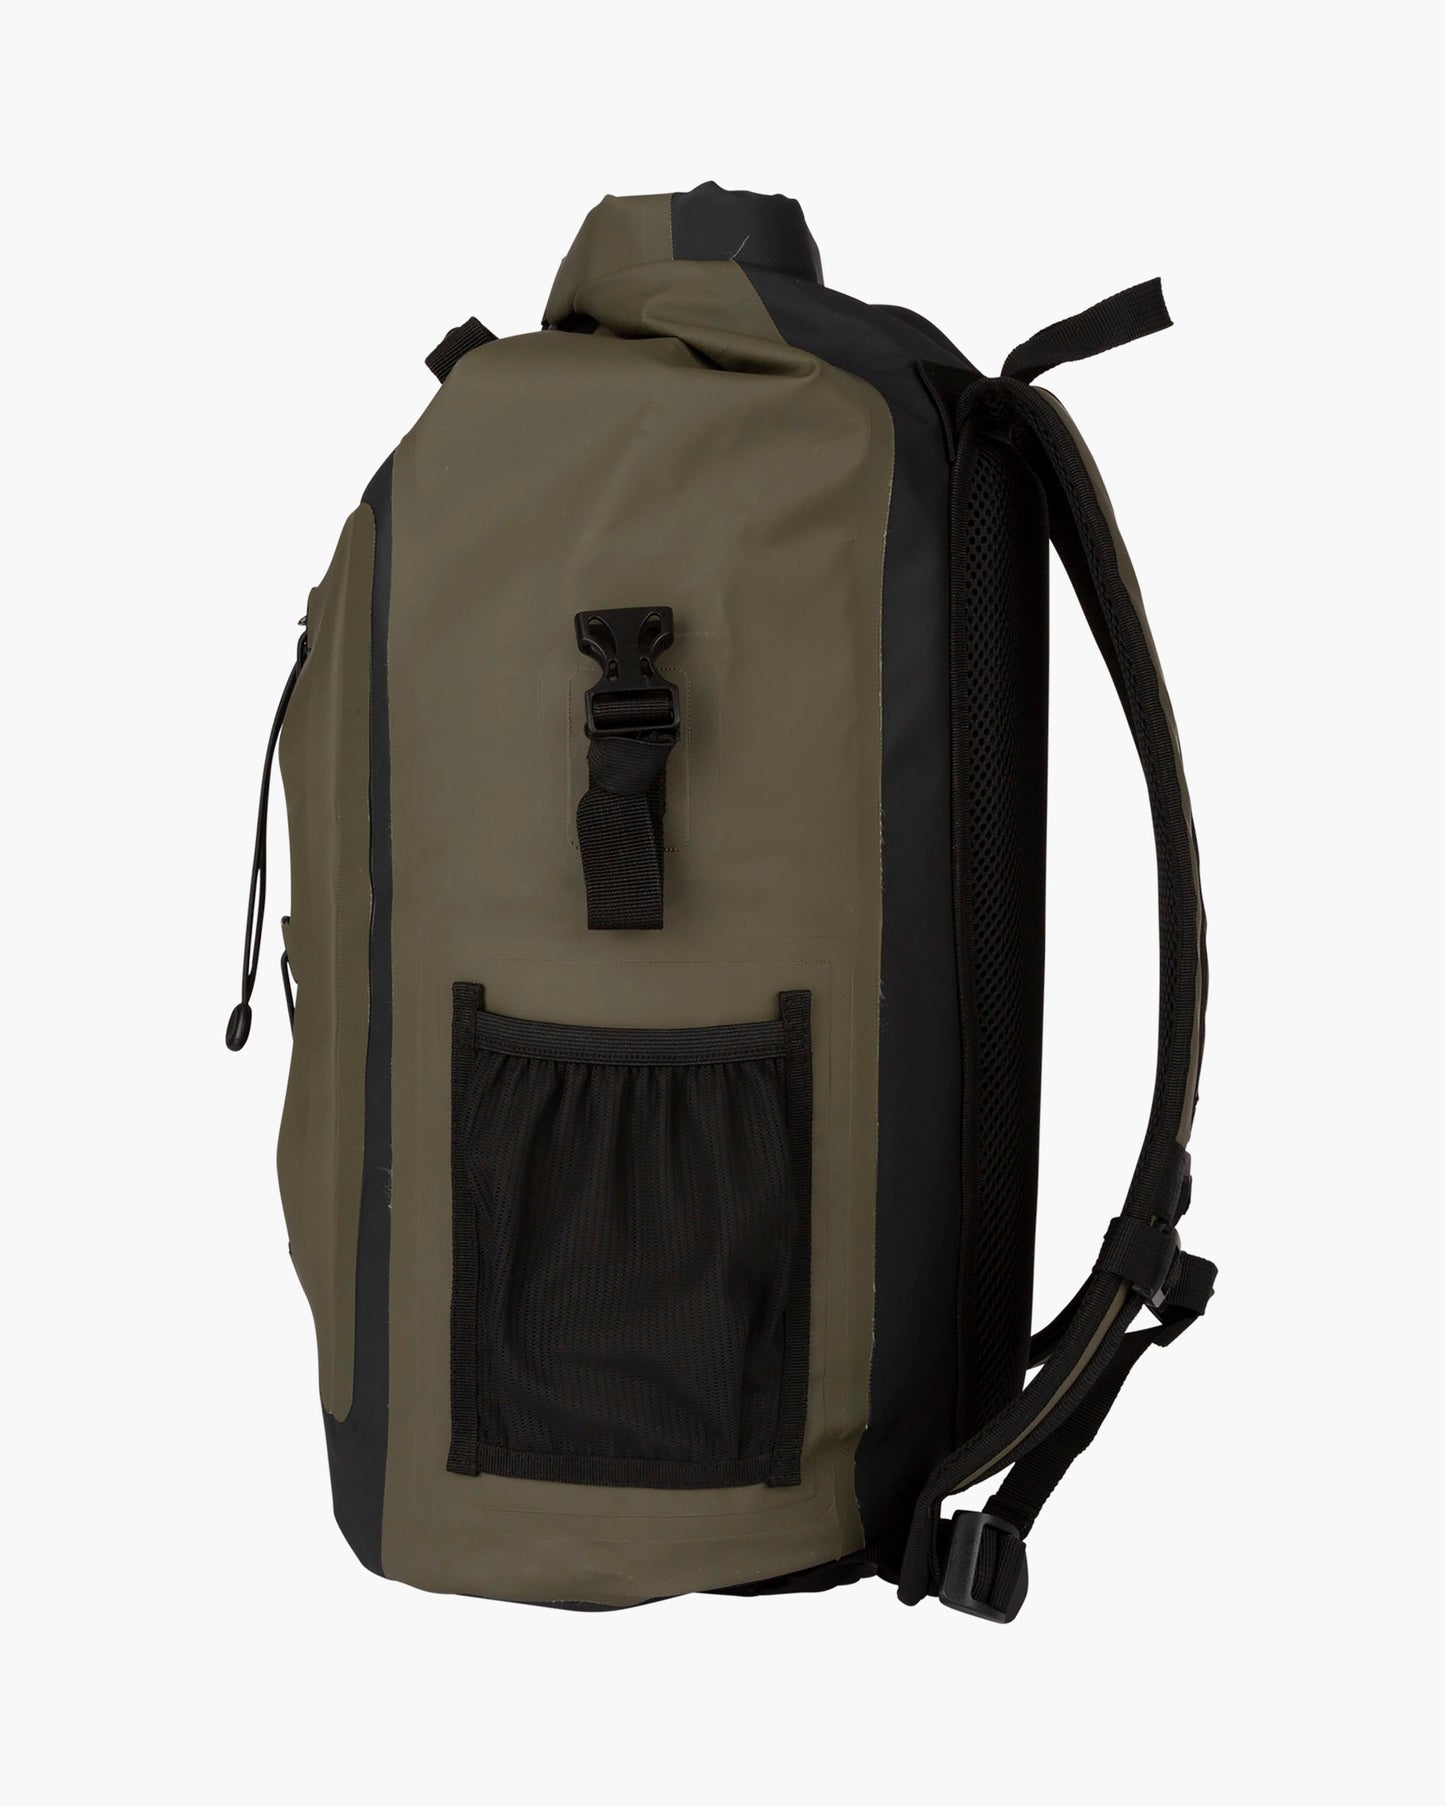 VOYAGER ROLL TOP BACKPACK - Black/Military